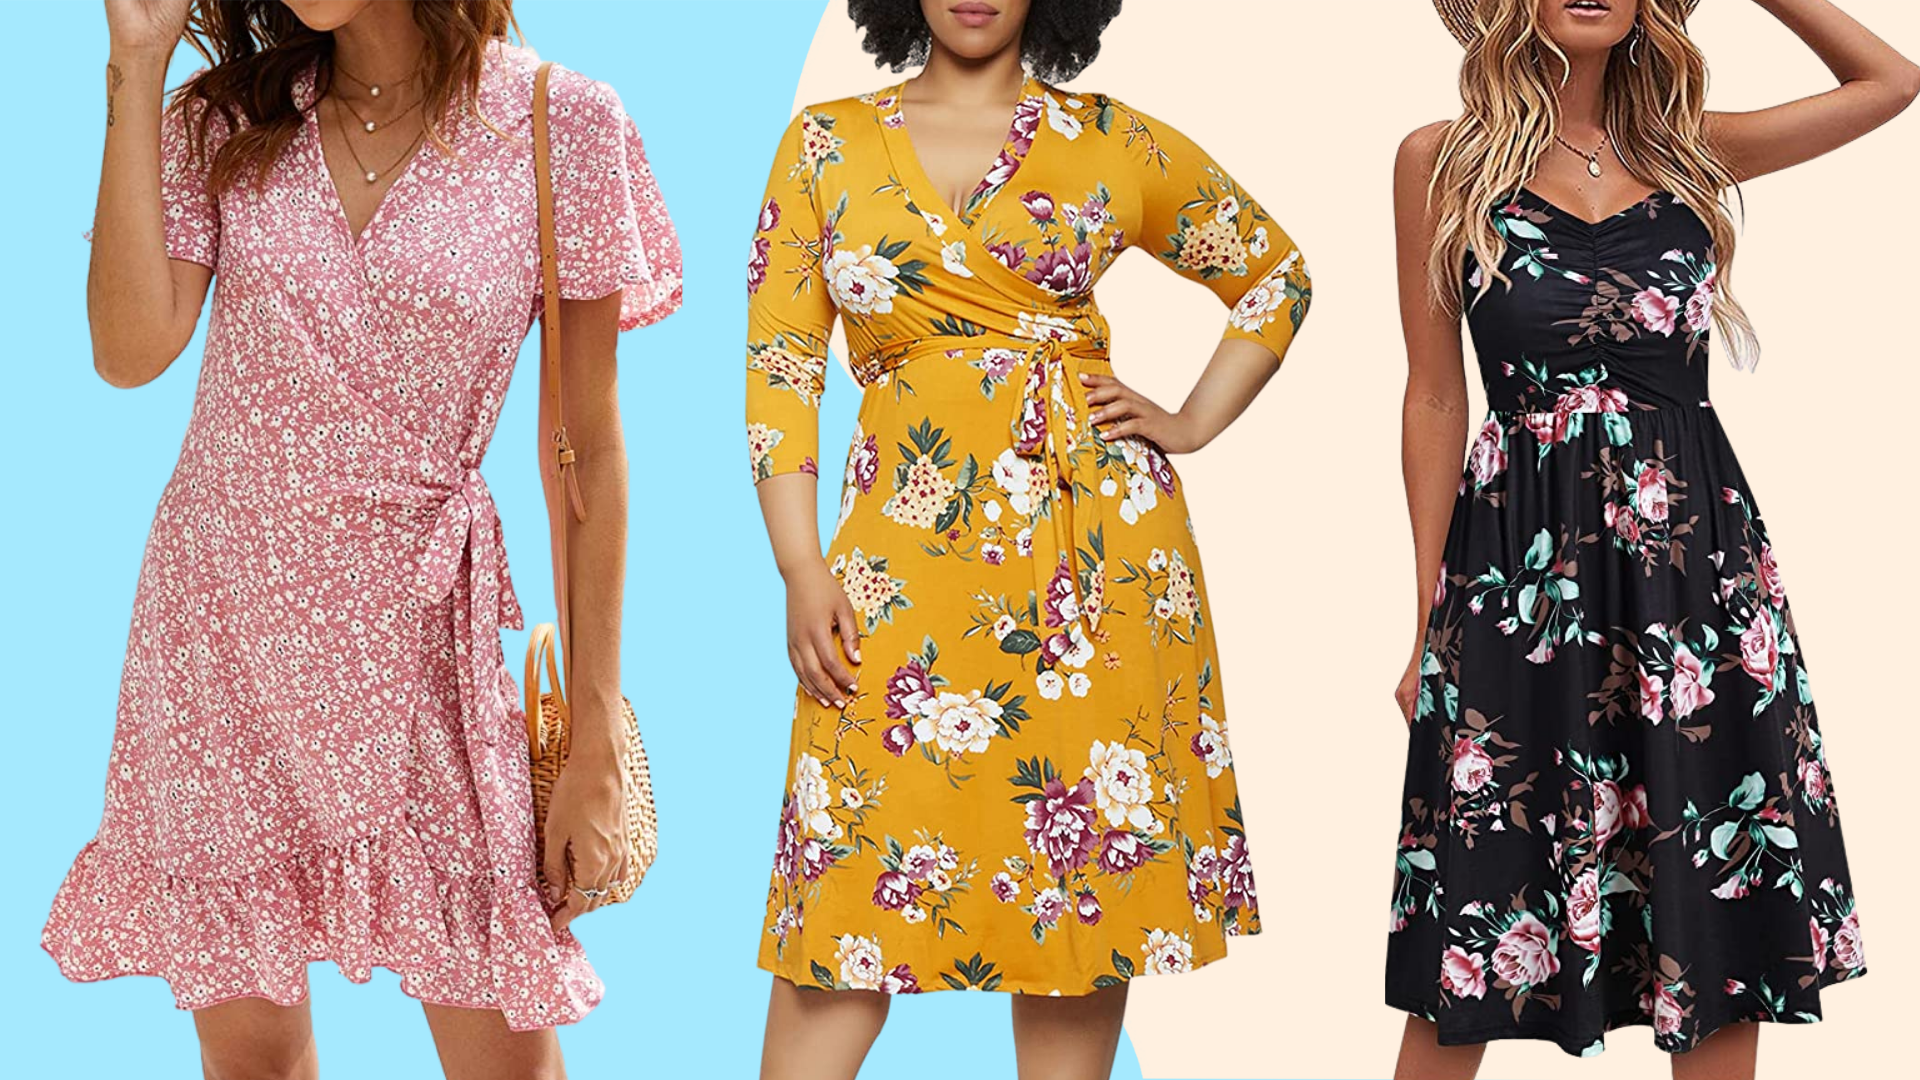 Spring dresses: The best spring dresses from Amazon under $40